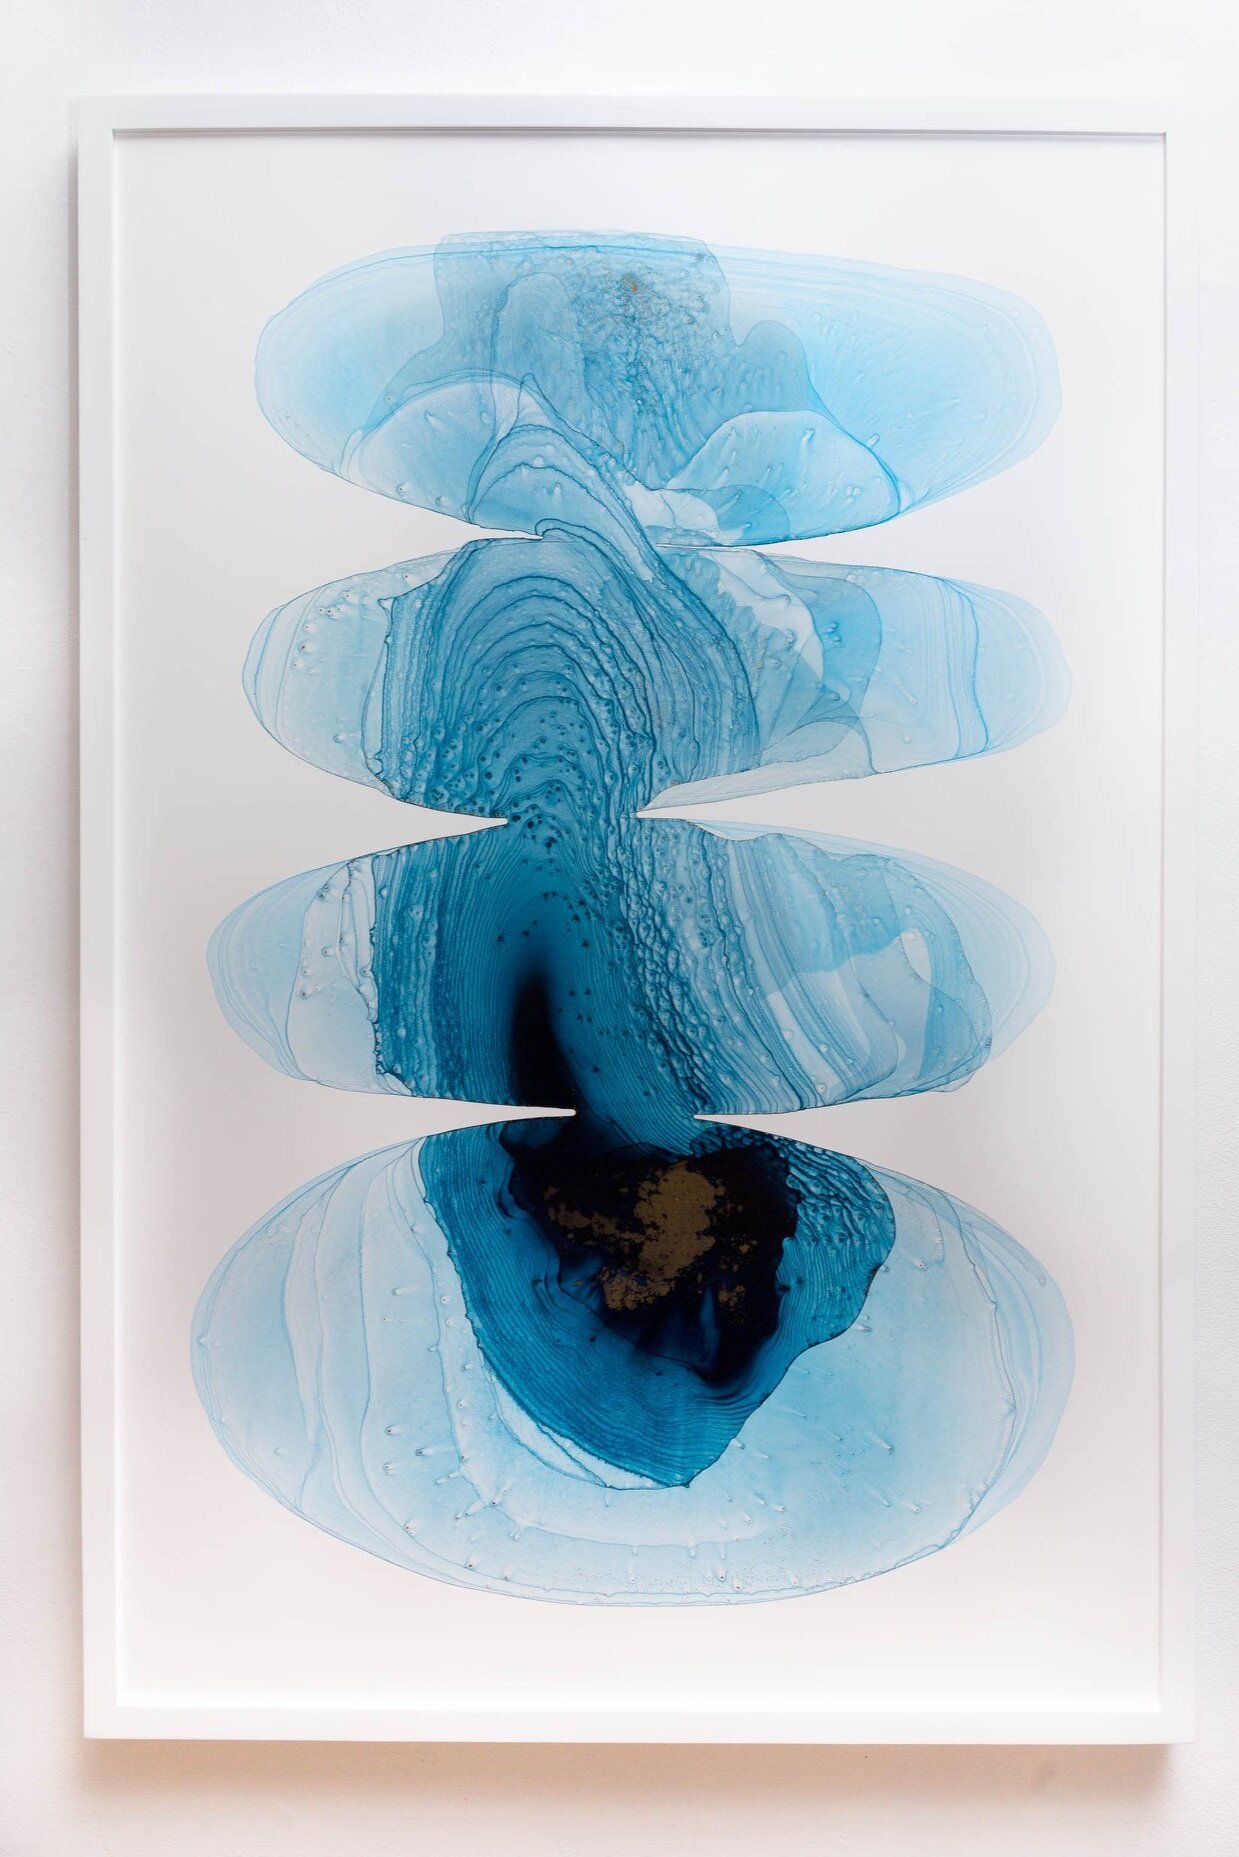    Balancing Act Series: Etched Blues  , acrylic on Yupo, 37 x 25 in., 2019 